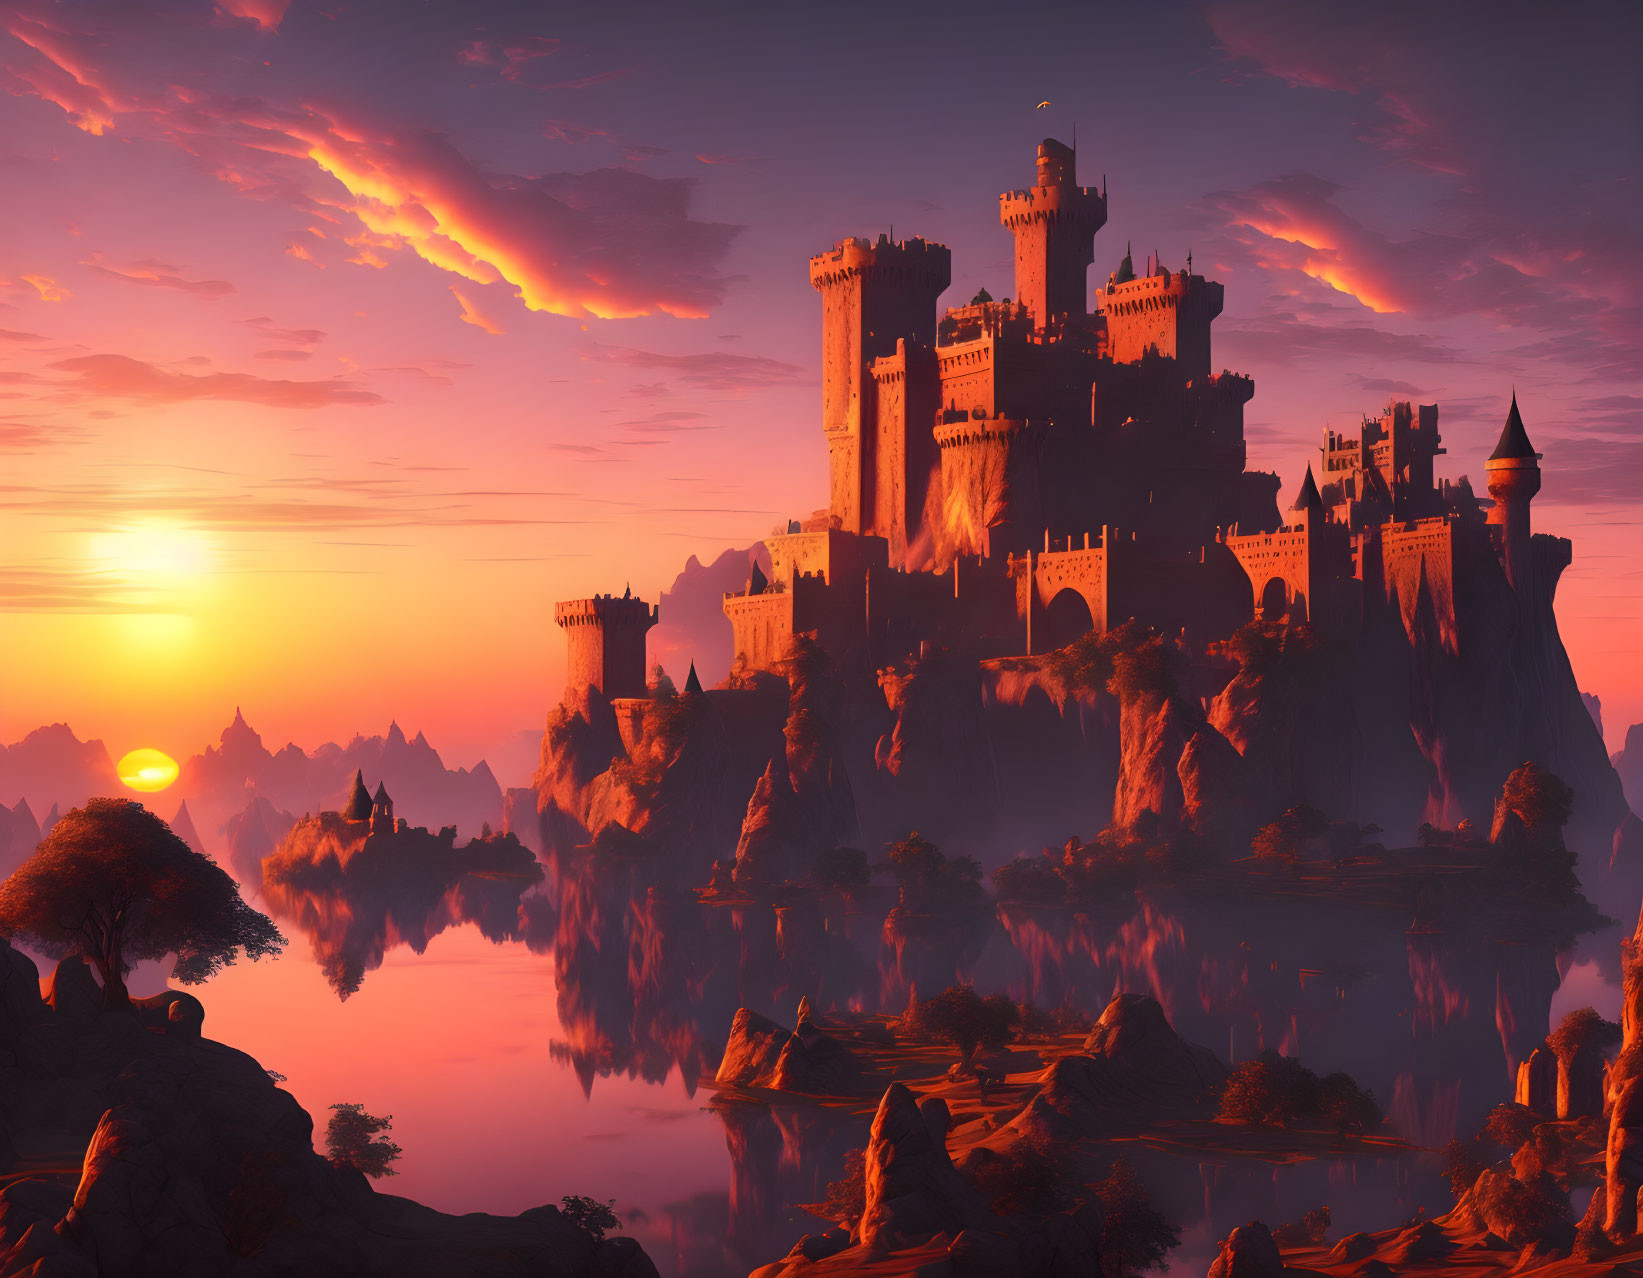 Gorgeous Castle from "Prince of Persia"